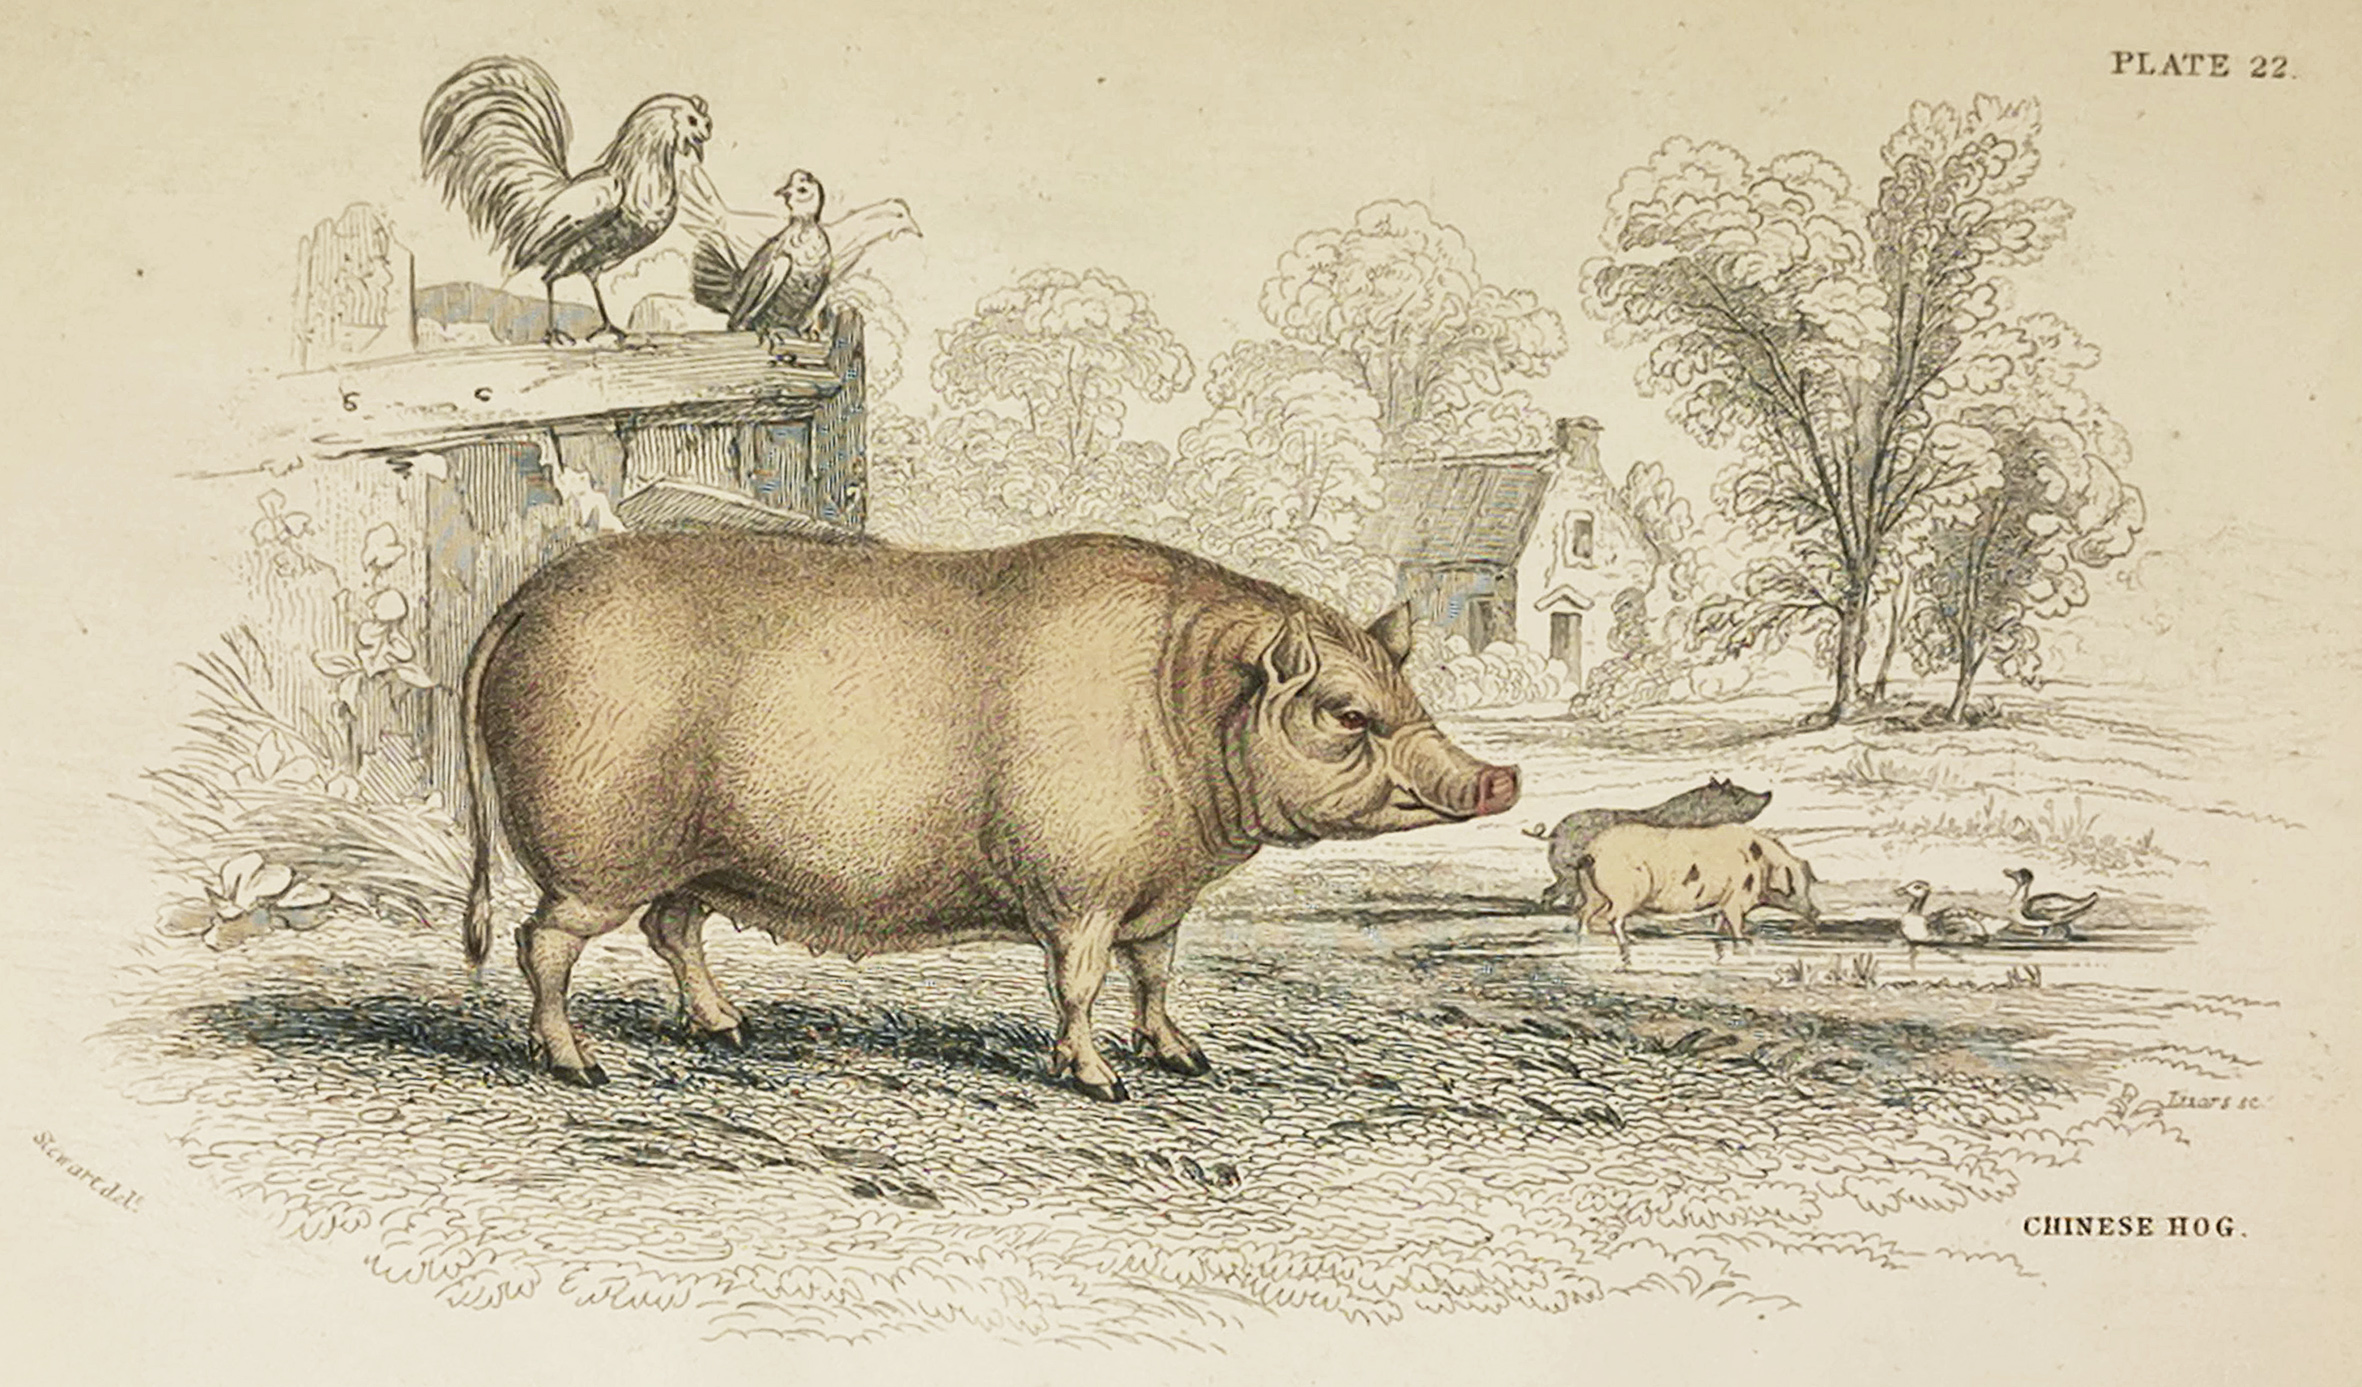 Chinese Hog. - Antique Print from 1836